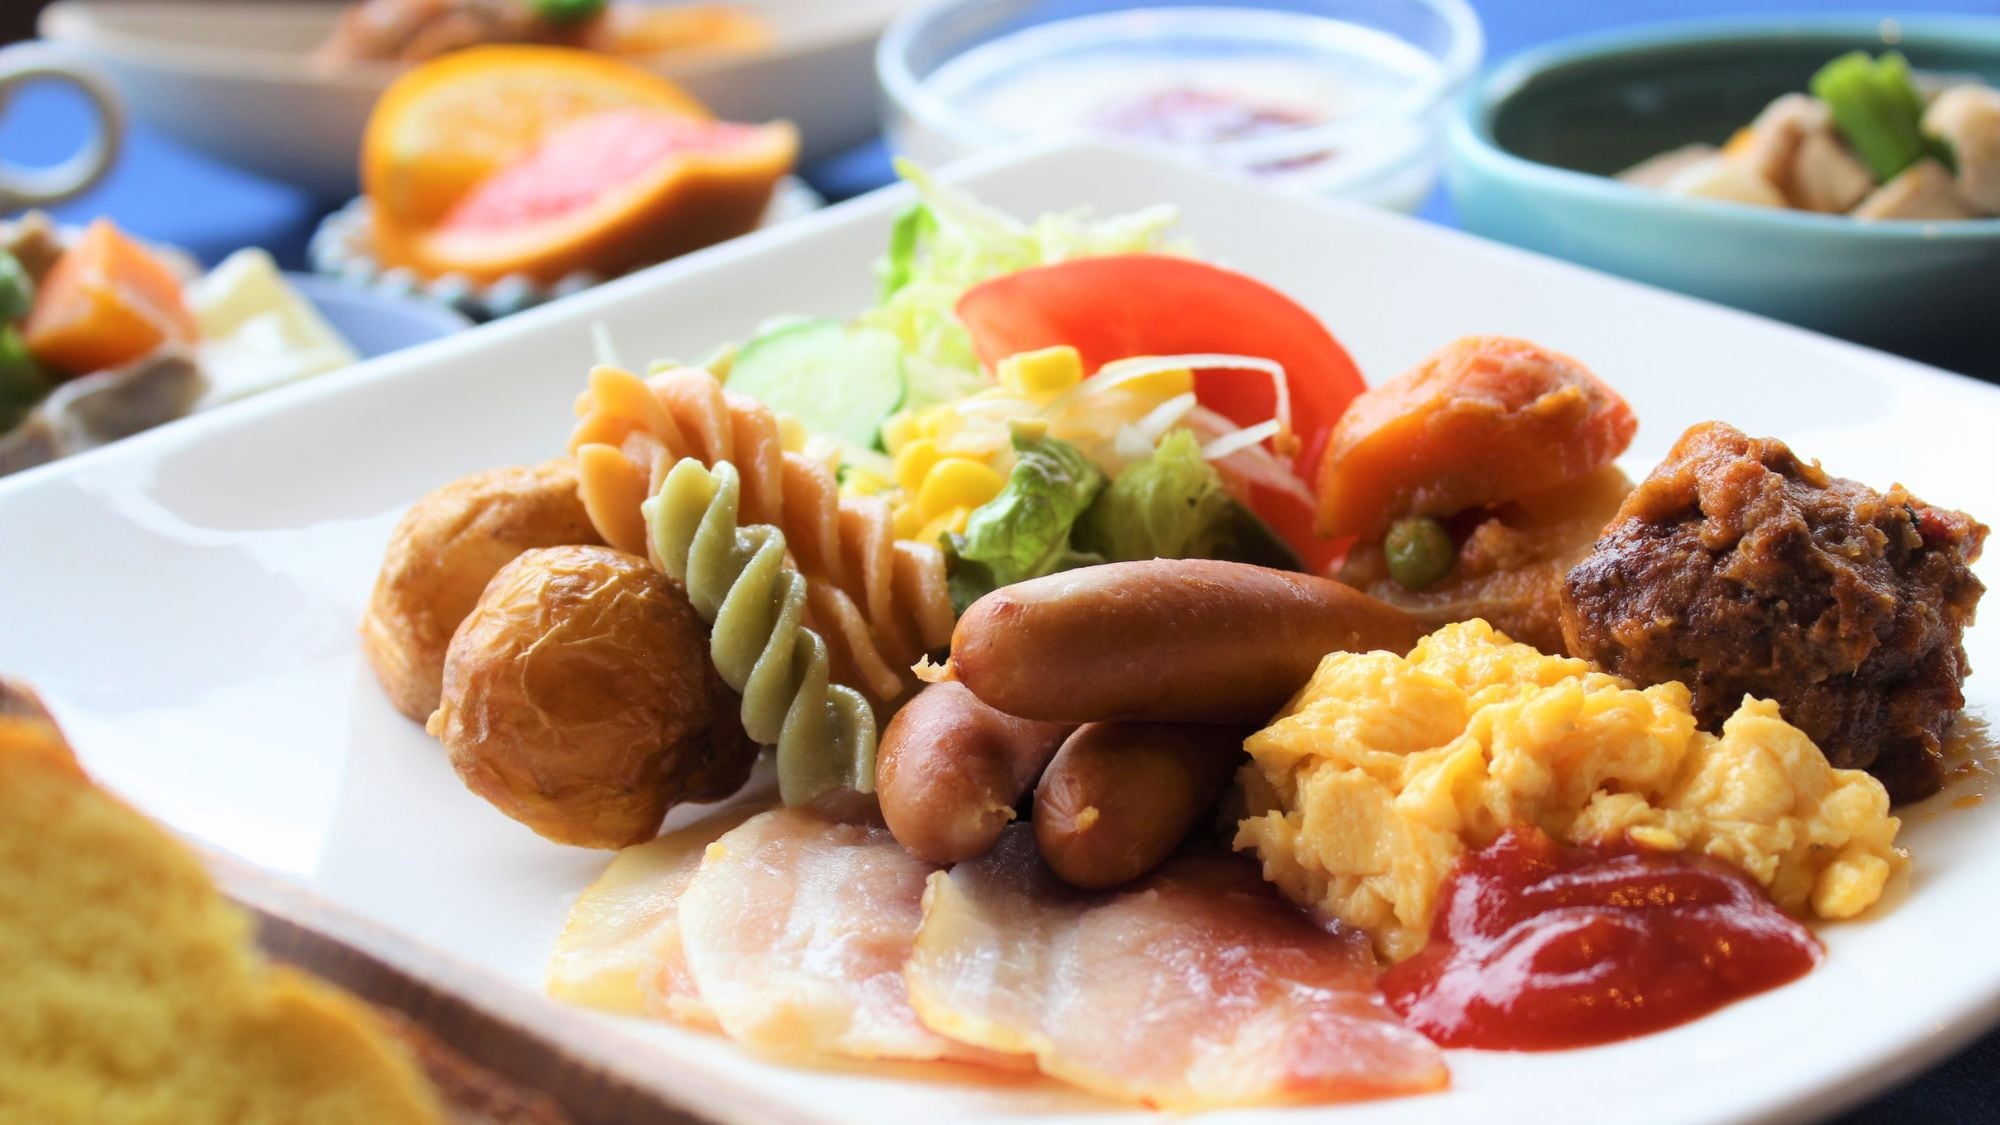 Our proud chef's homemade breakfast buffet ♪